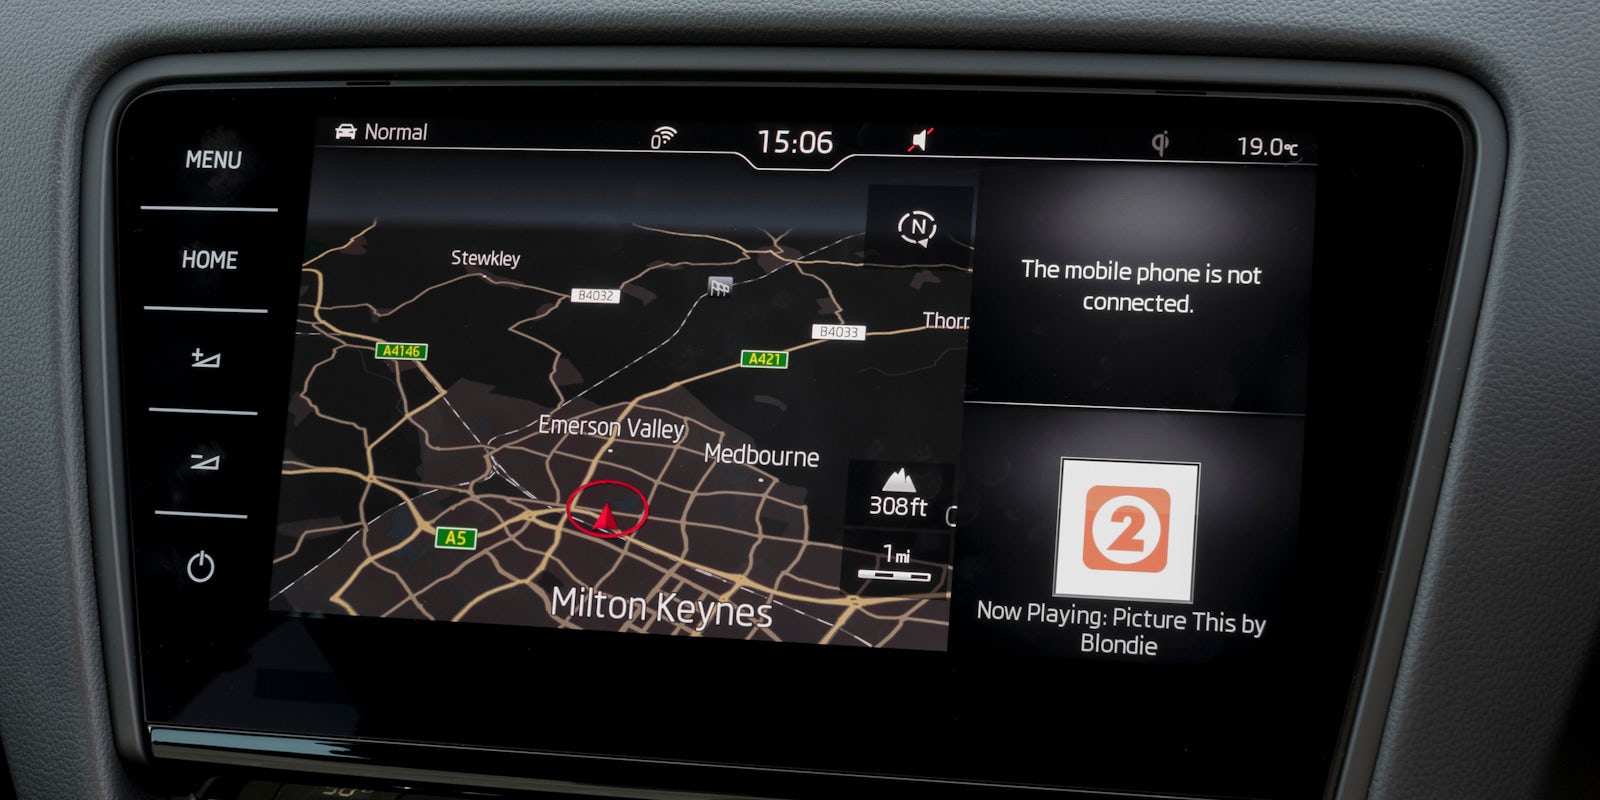 The Octavia's dashboard is well built and logically laid out